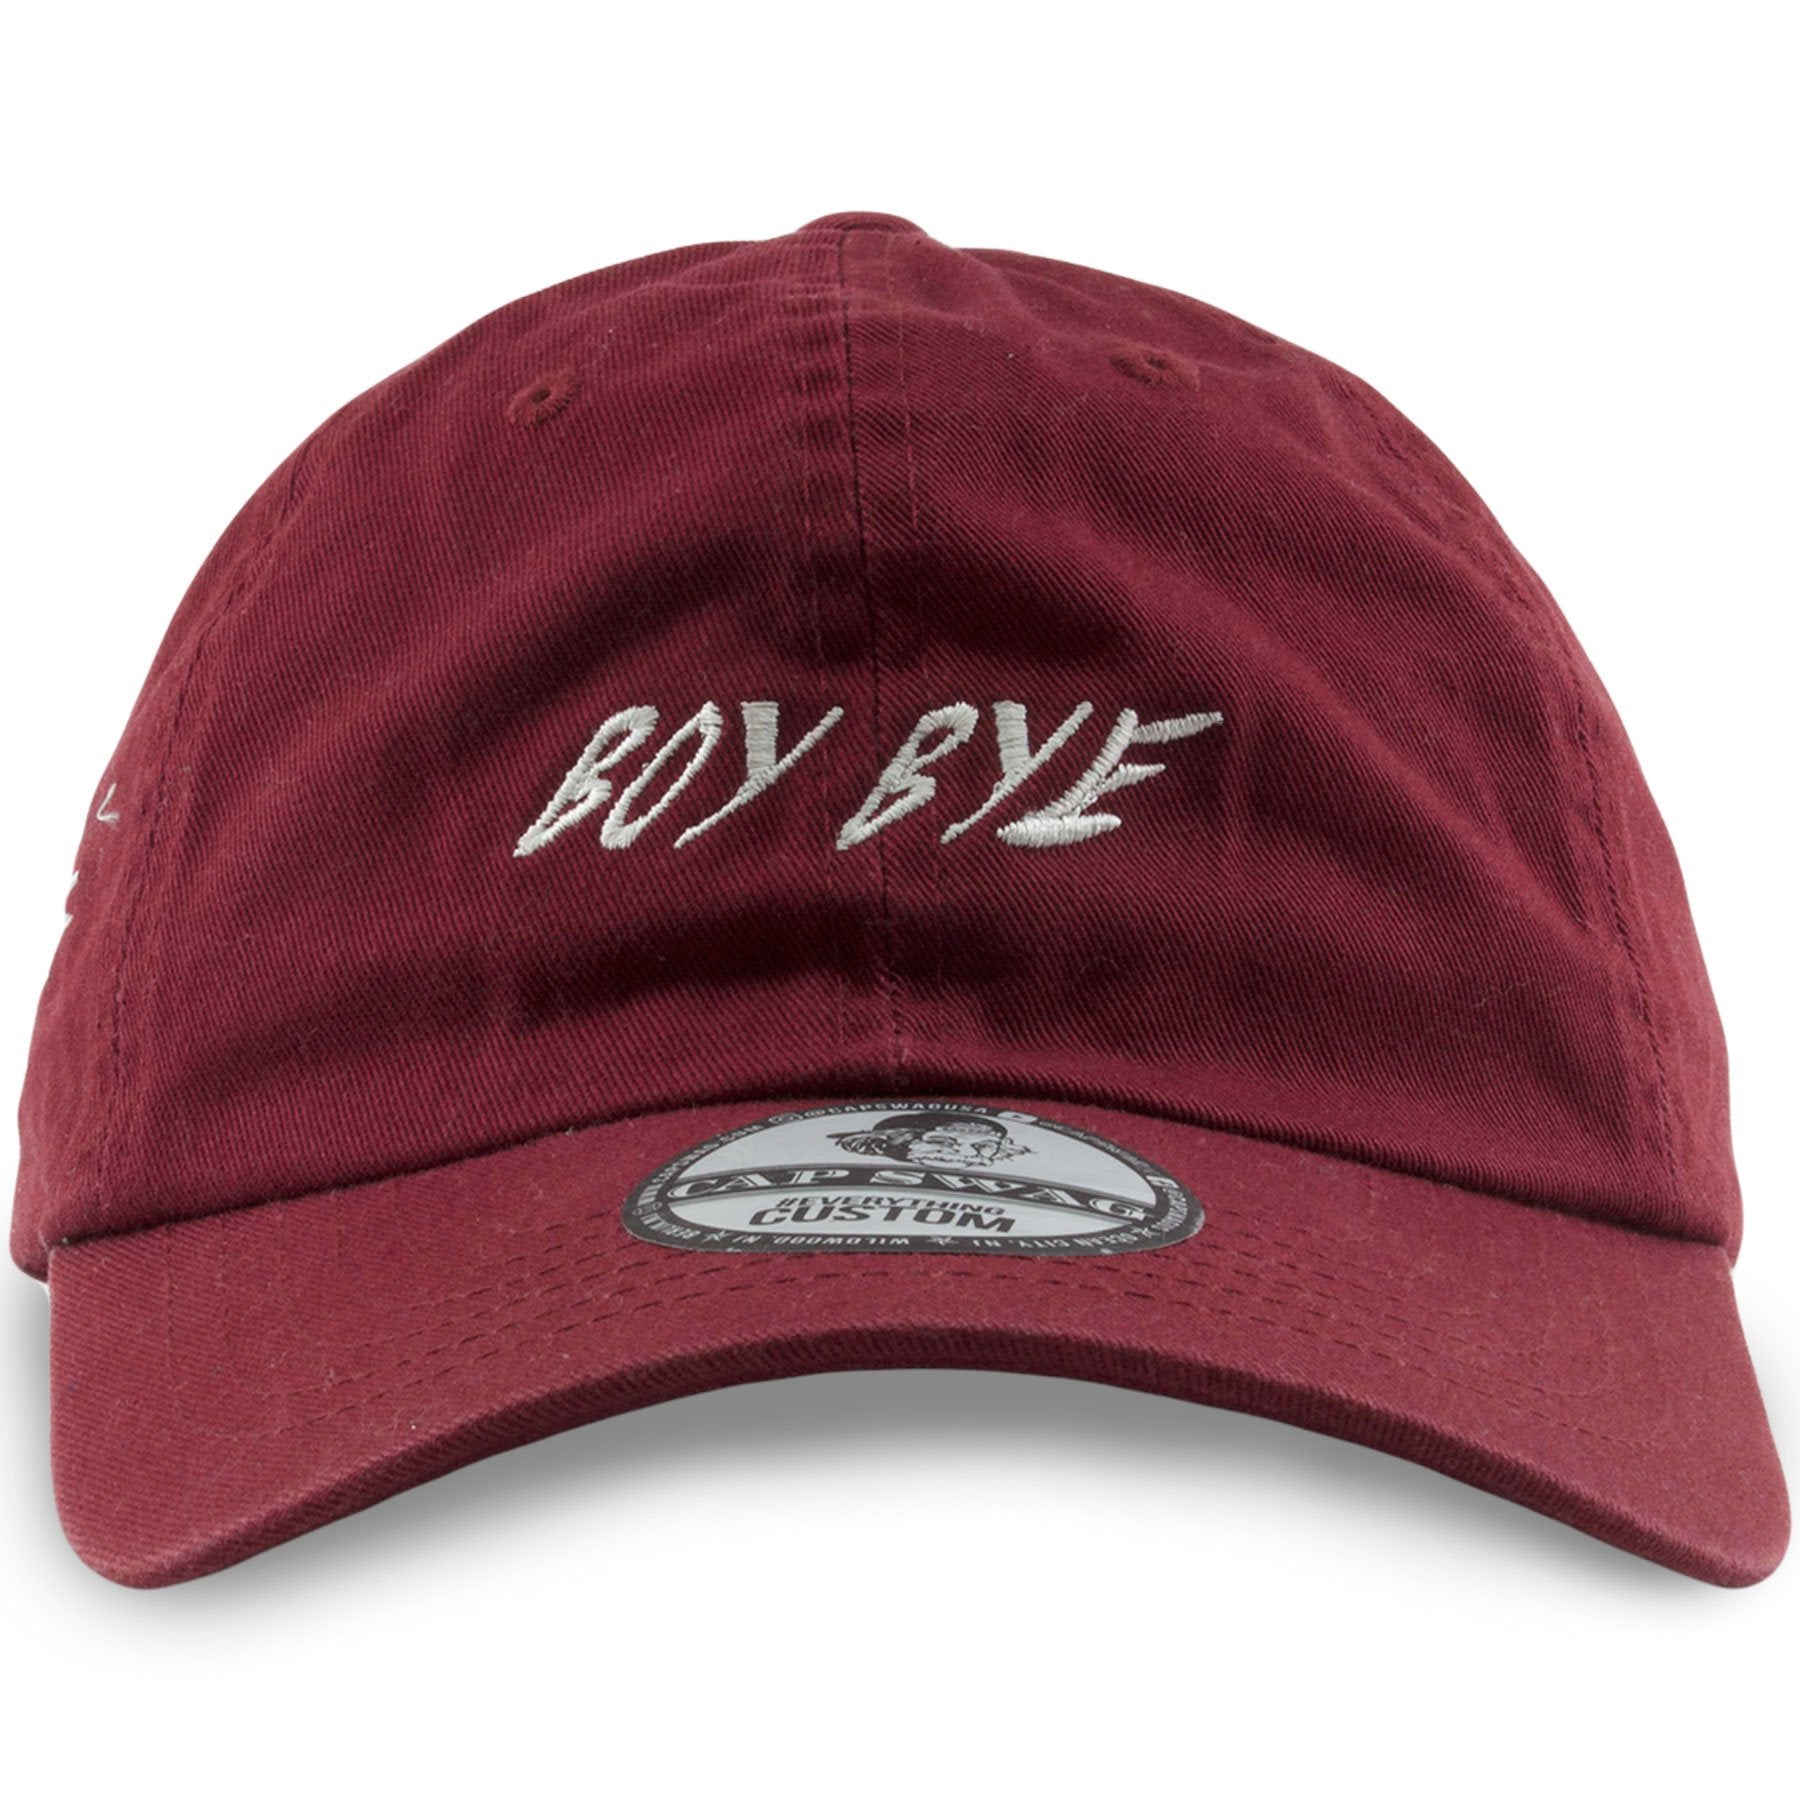 embroidered on the front of the Boy Bye maroon adjustable dad hat is the Boy Bye logo in white script